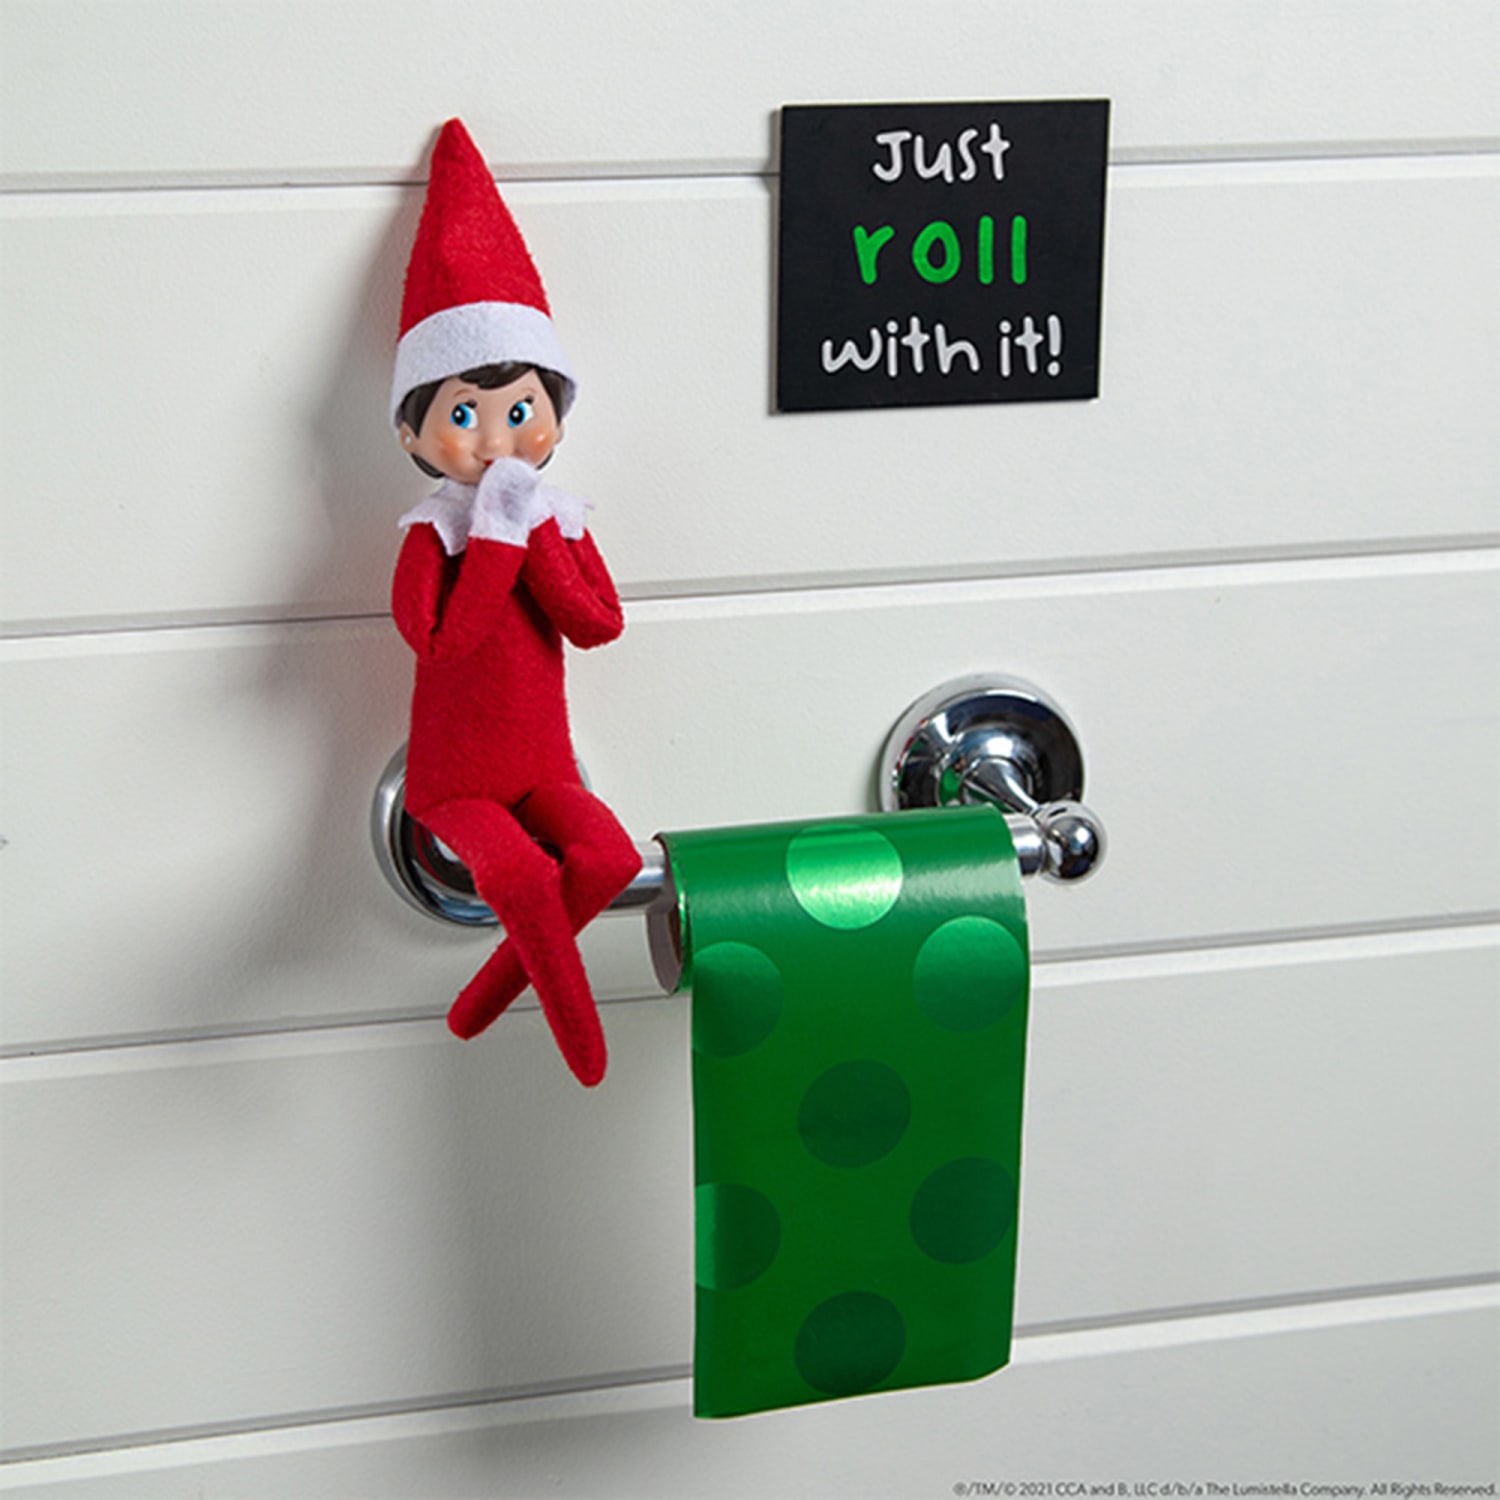 Introducing a Second Elf on the Shelf Double the Fun, Double the Mischief!